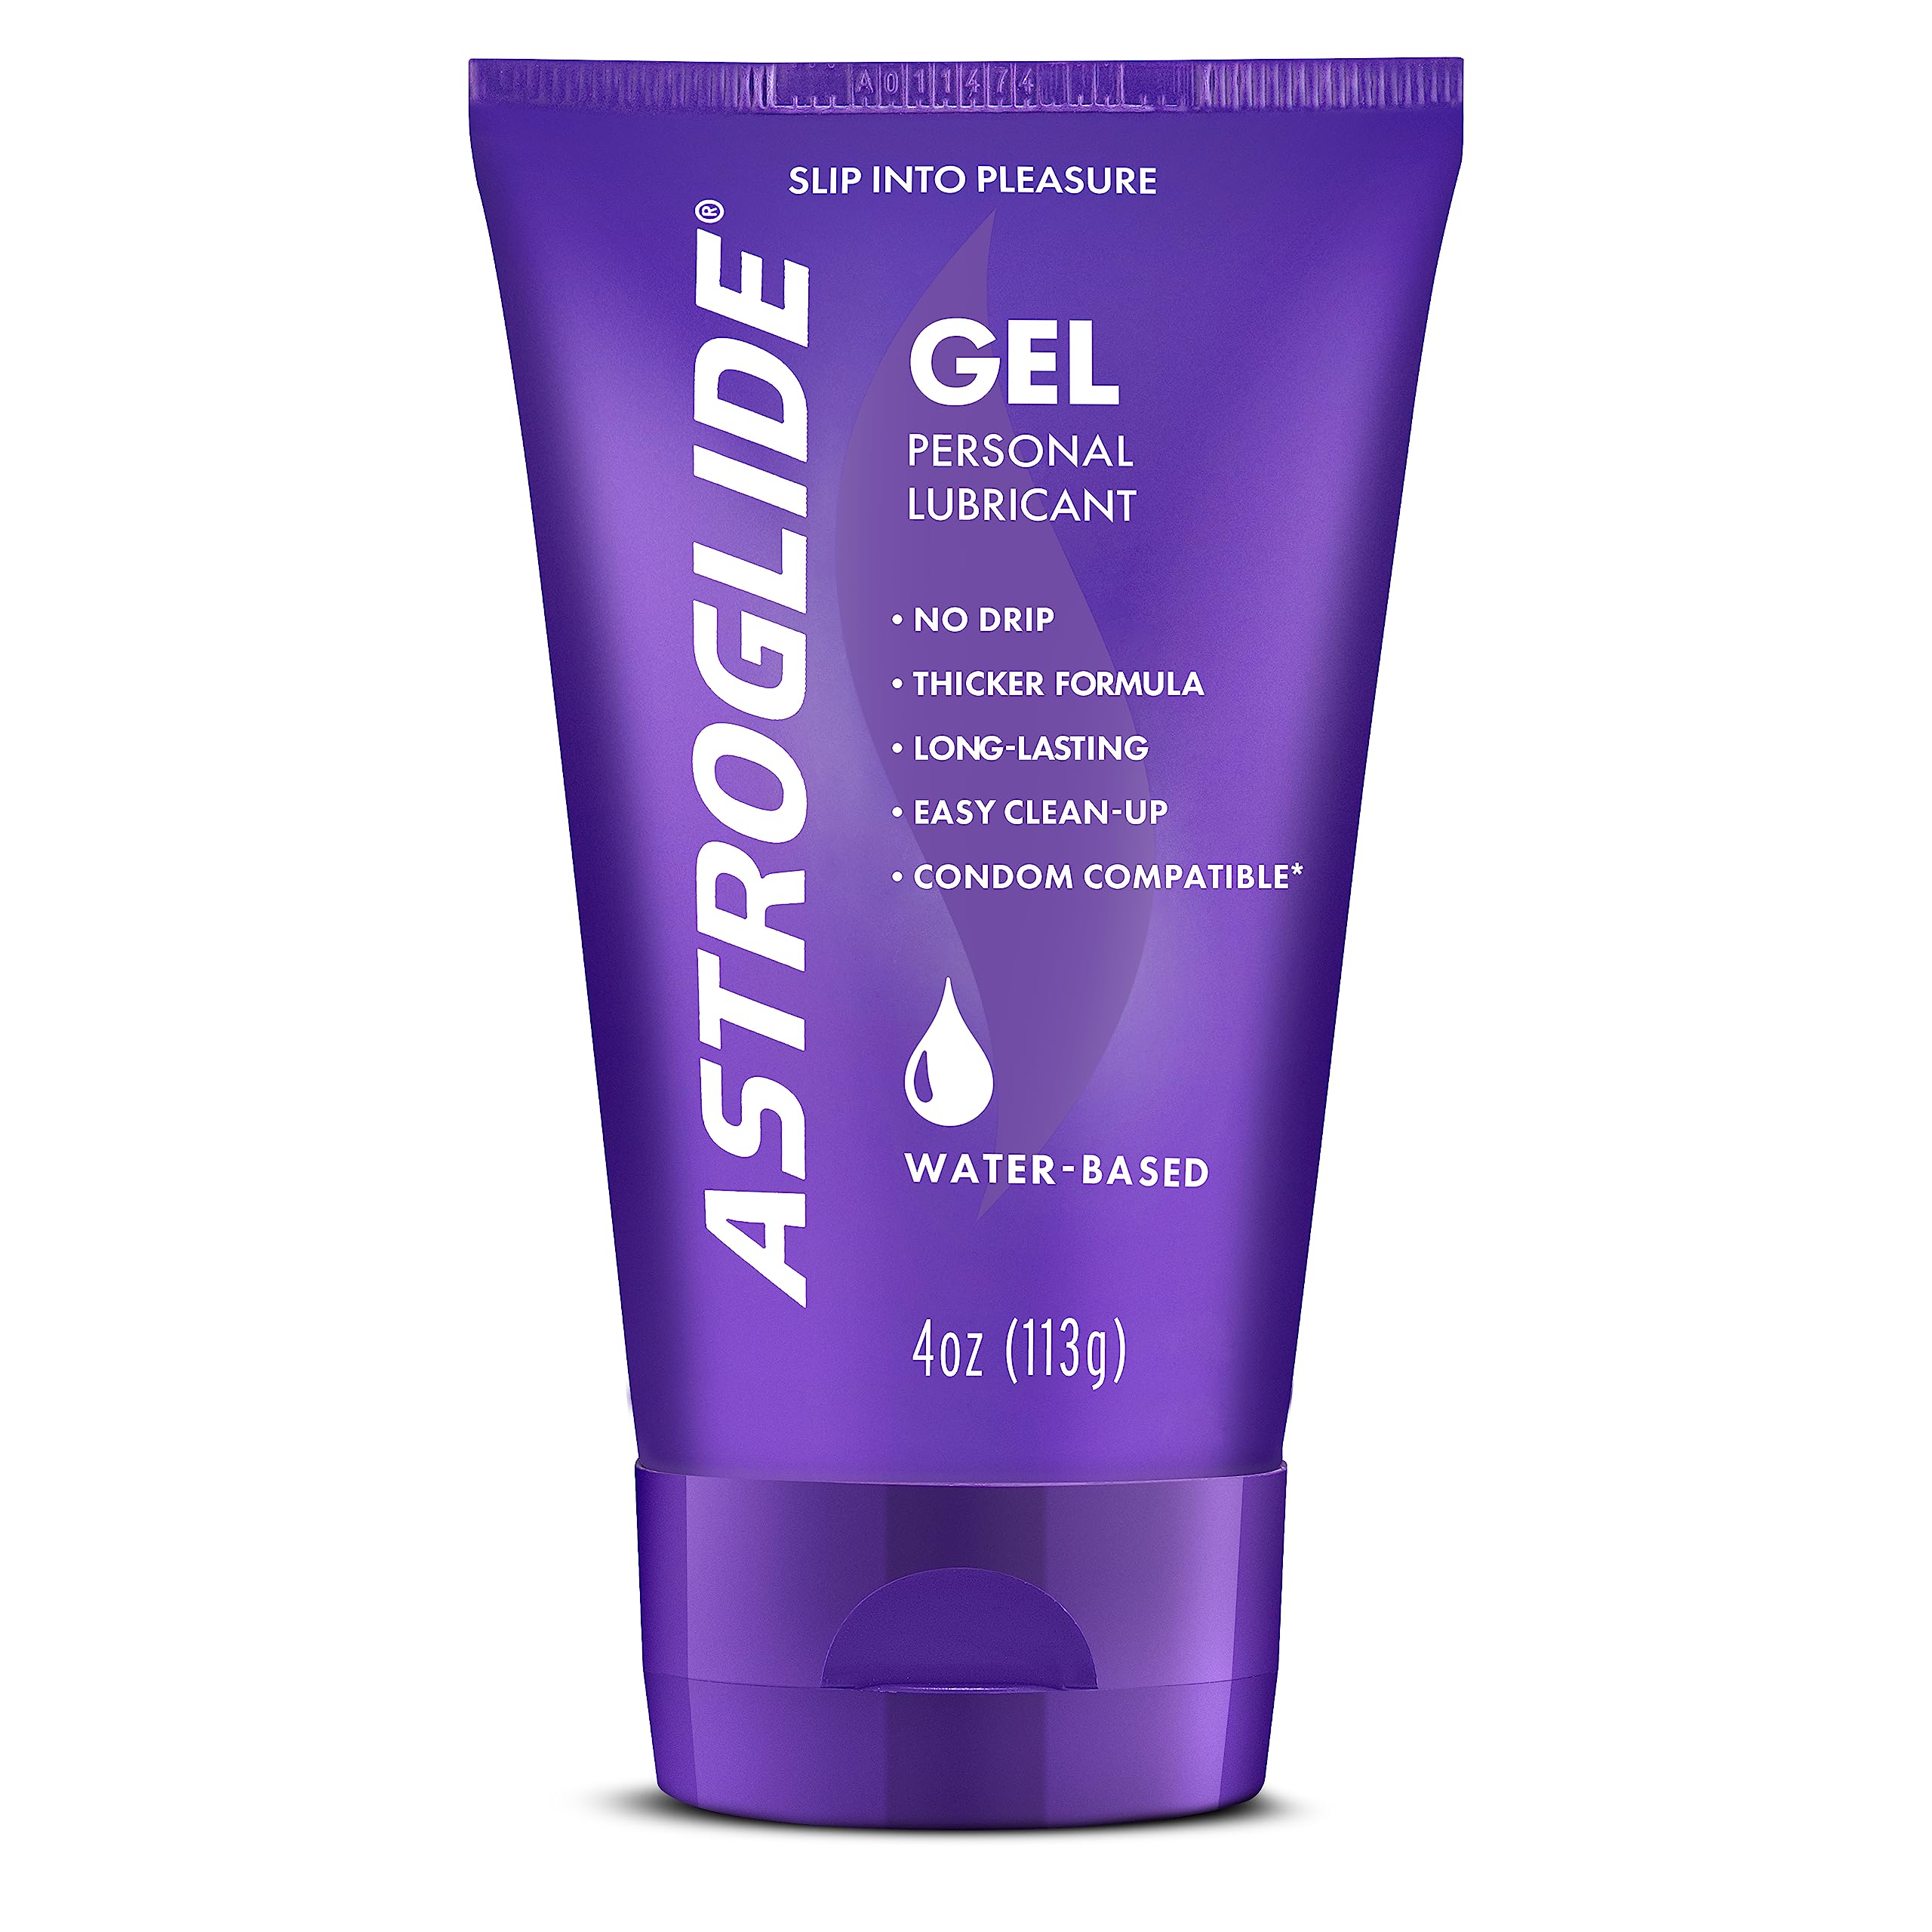 Astroglide Gel, Personal Lubricant (4oz), Stays Put with No Drip, Dr. Recommended Brand, Water Based Lube Gel For Couples, Women, and Men, Long-Lasting Pleasure, Condom Compatible, Manufactured in USA